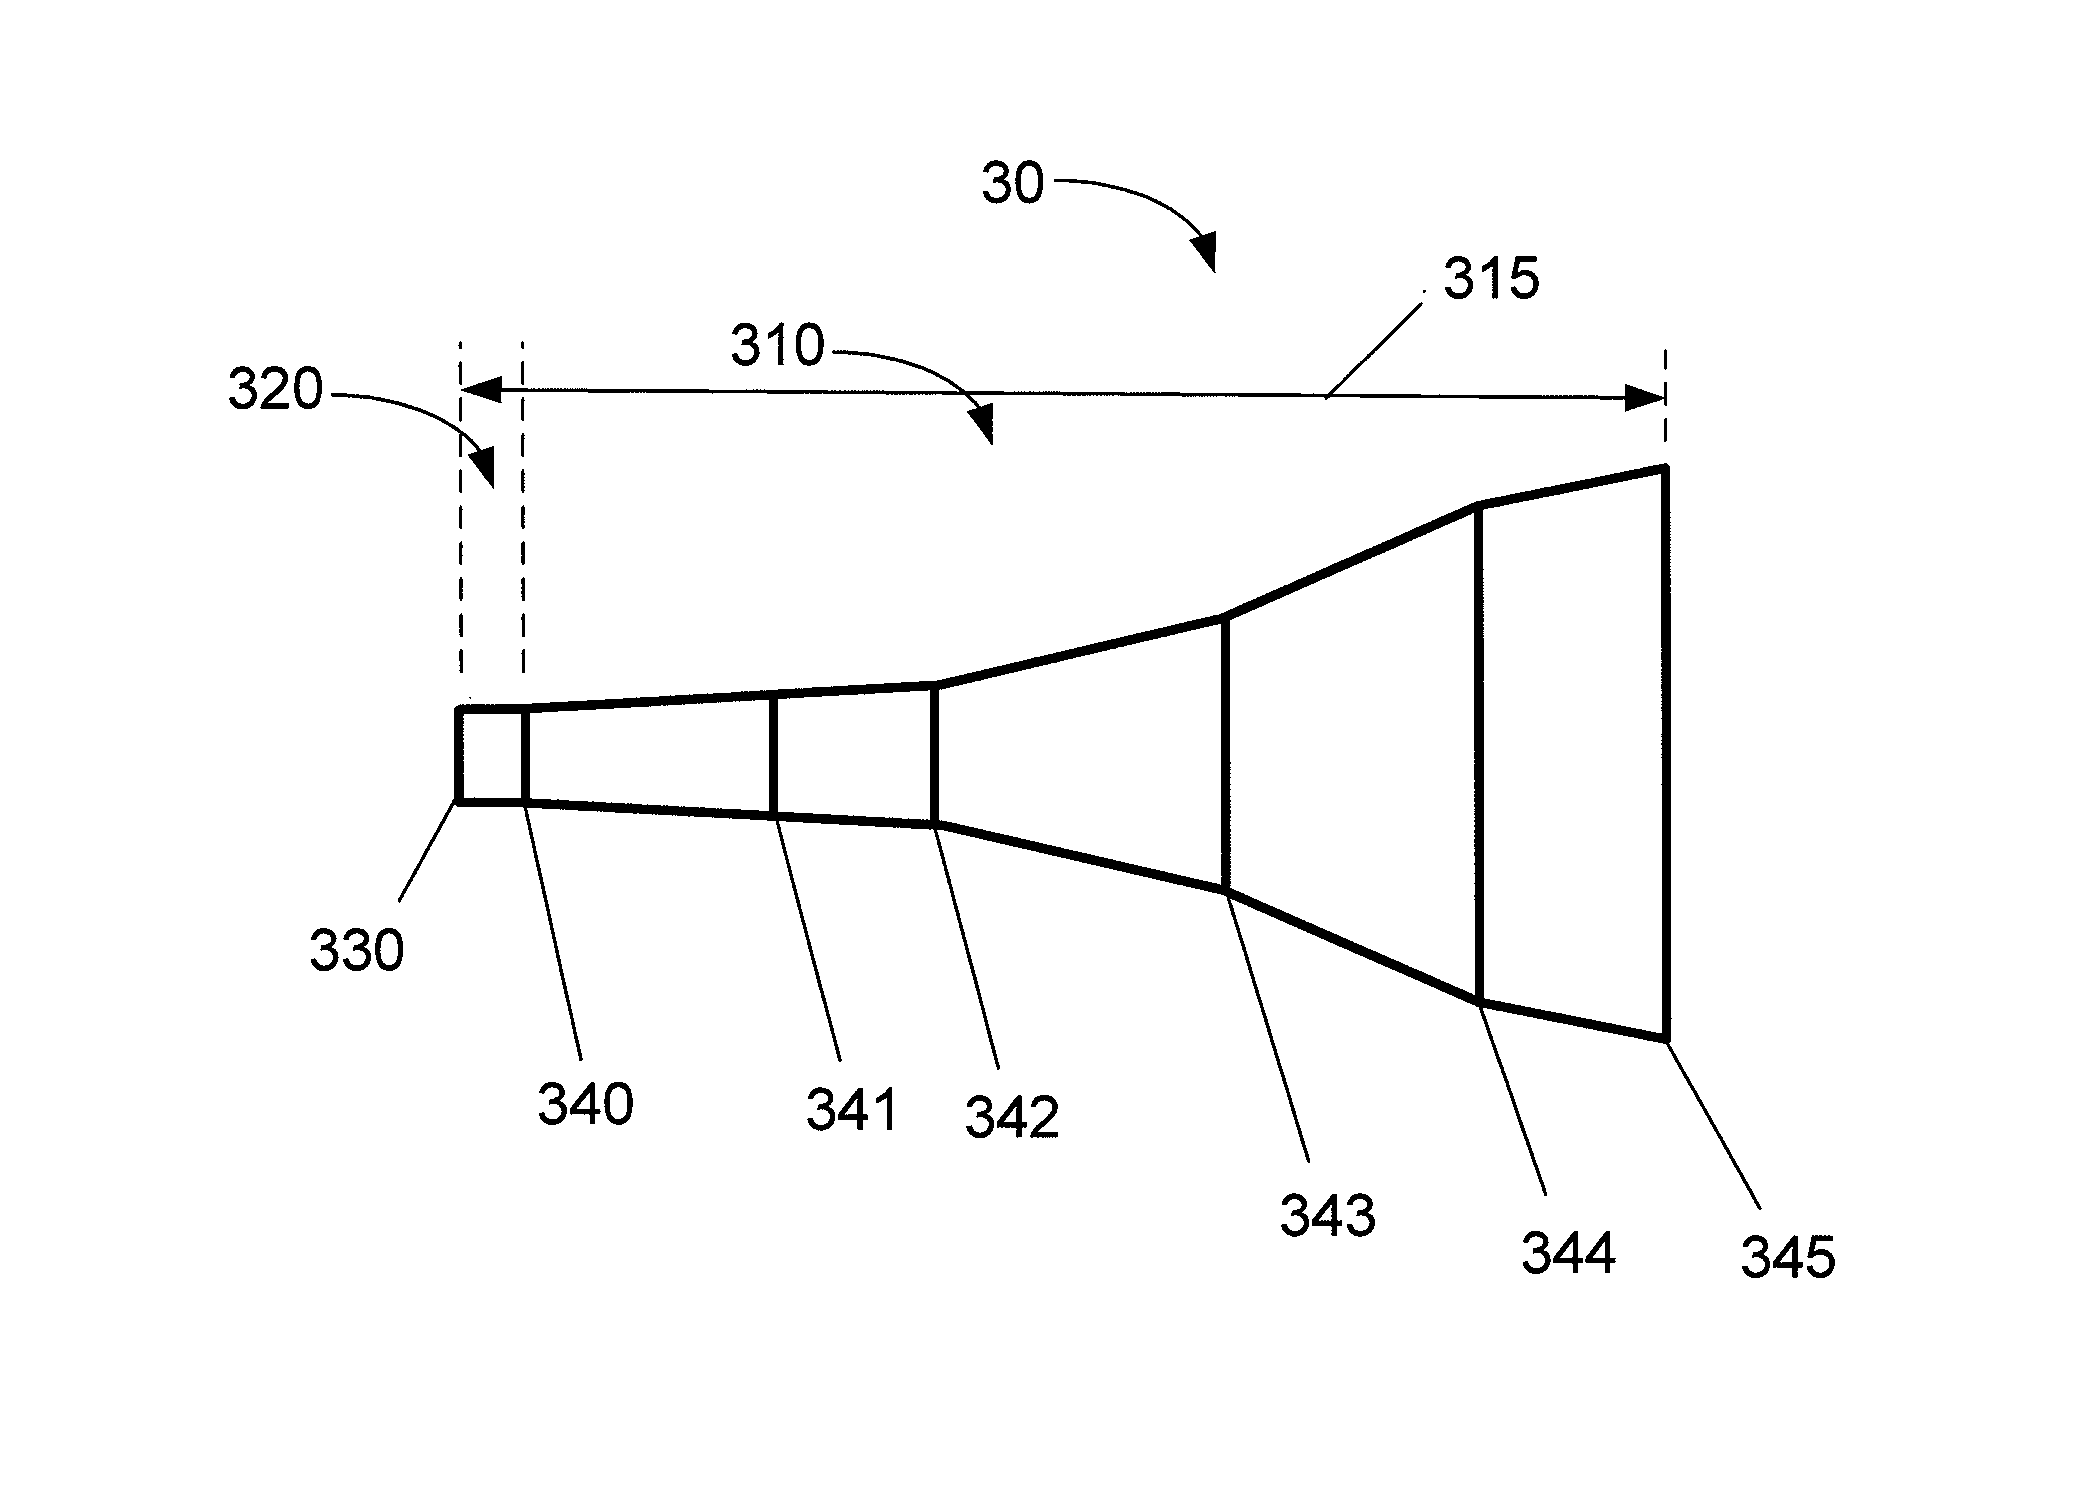 Dual-band antenna using high/low efficiency feed horn for optimal radiation patterns